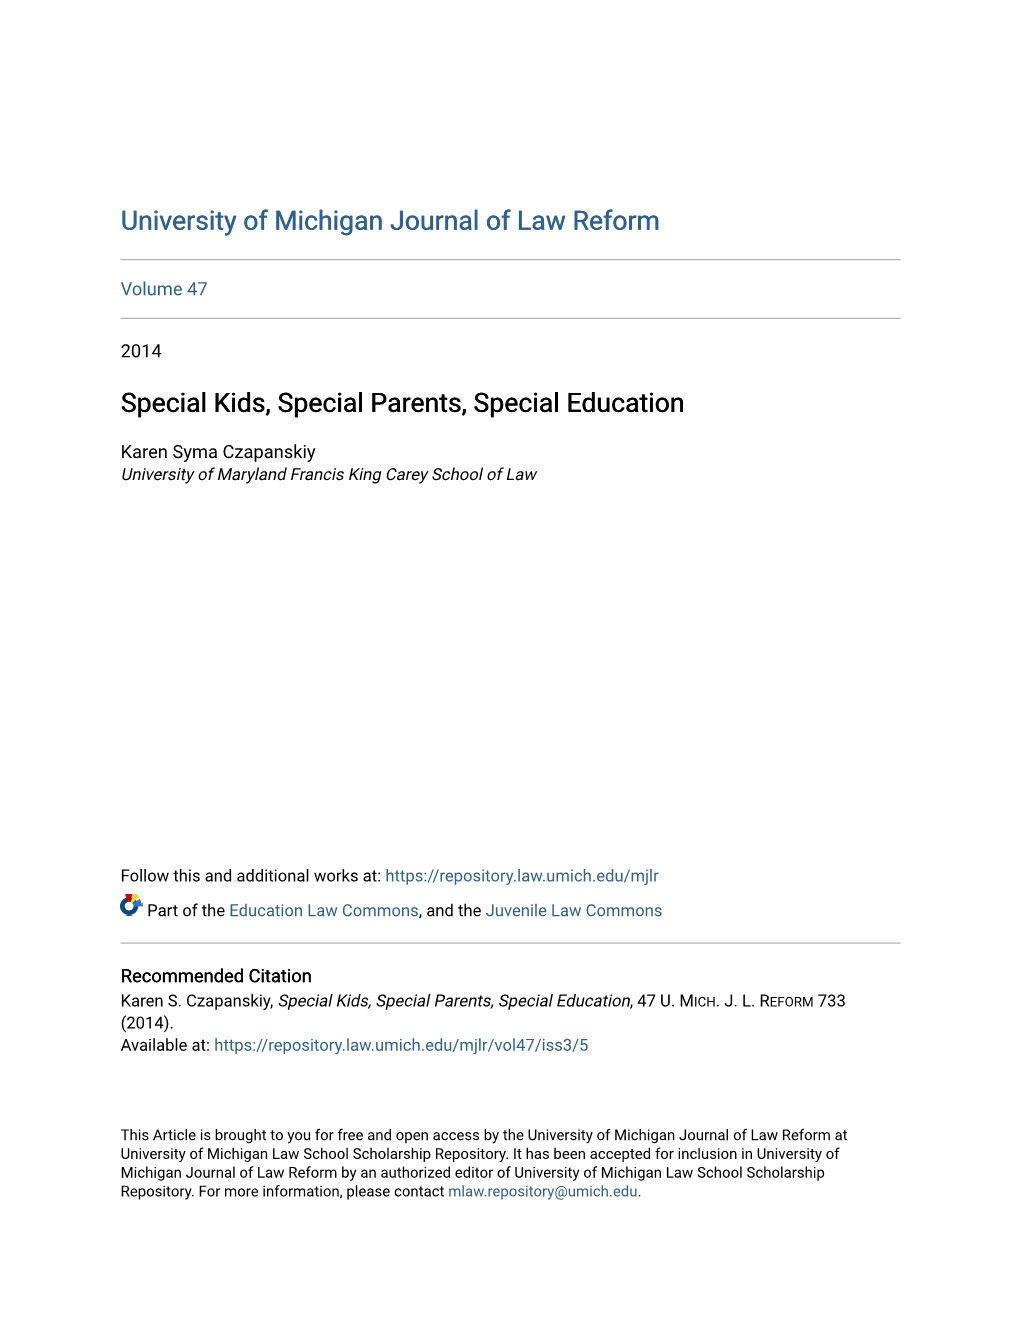 Special Kids, Special Parents, Special Education